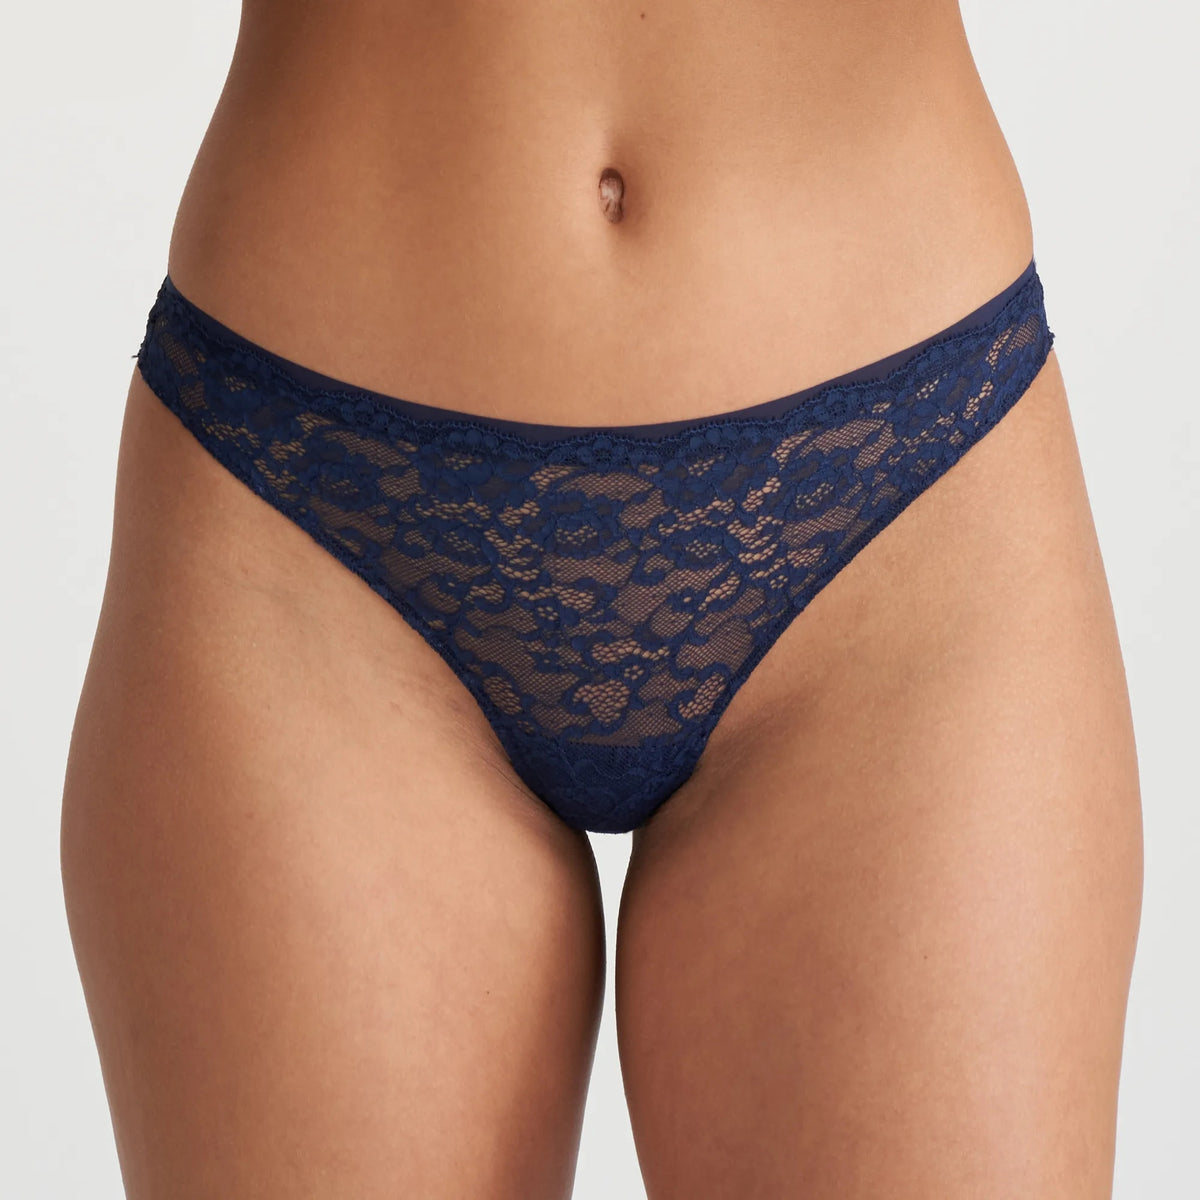 Kelly Designs Blue Peach Lace Underwear(Instock Collection)